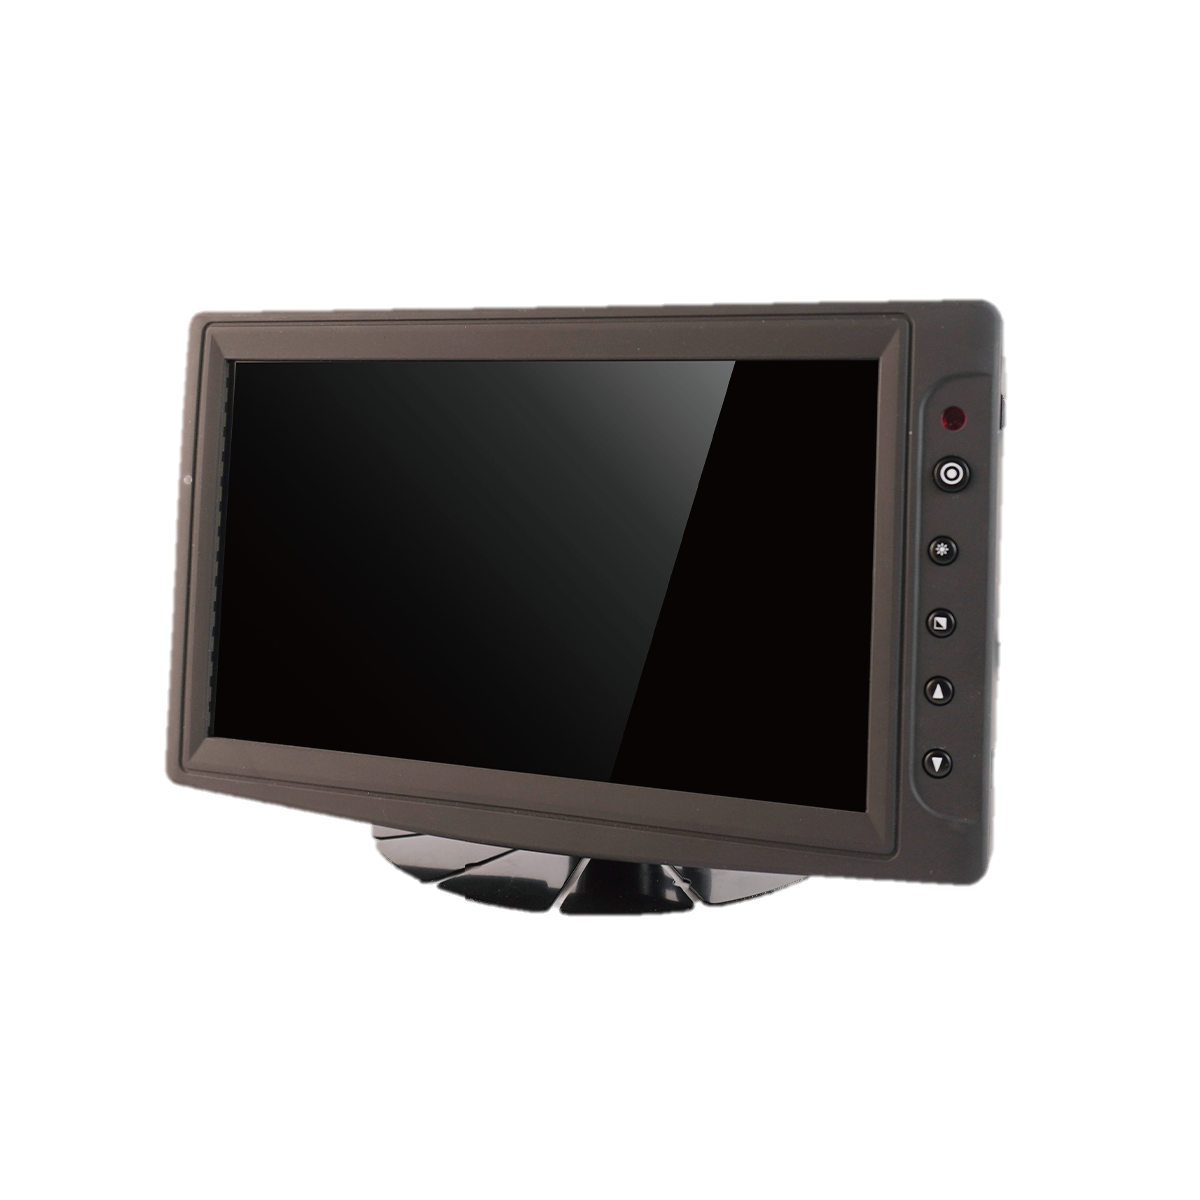 SEF800TPC(W)-LUH is an industrial ultra-bright touch monitor which can be used to any kinds of vehicles.